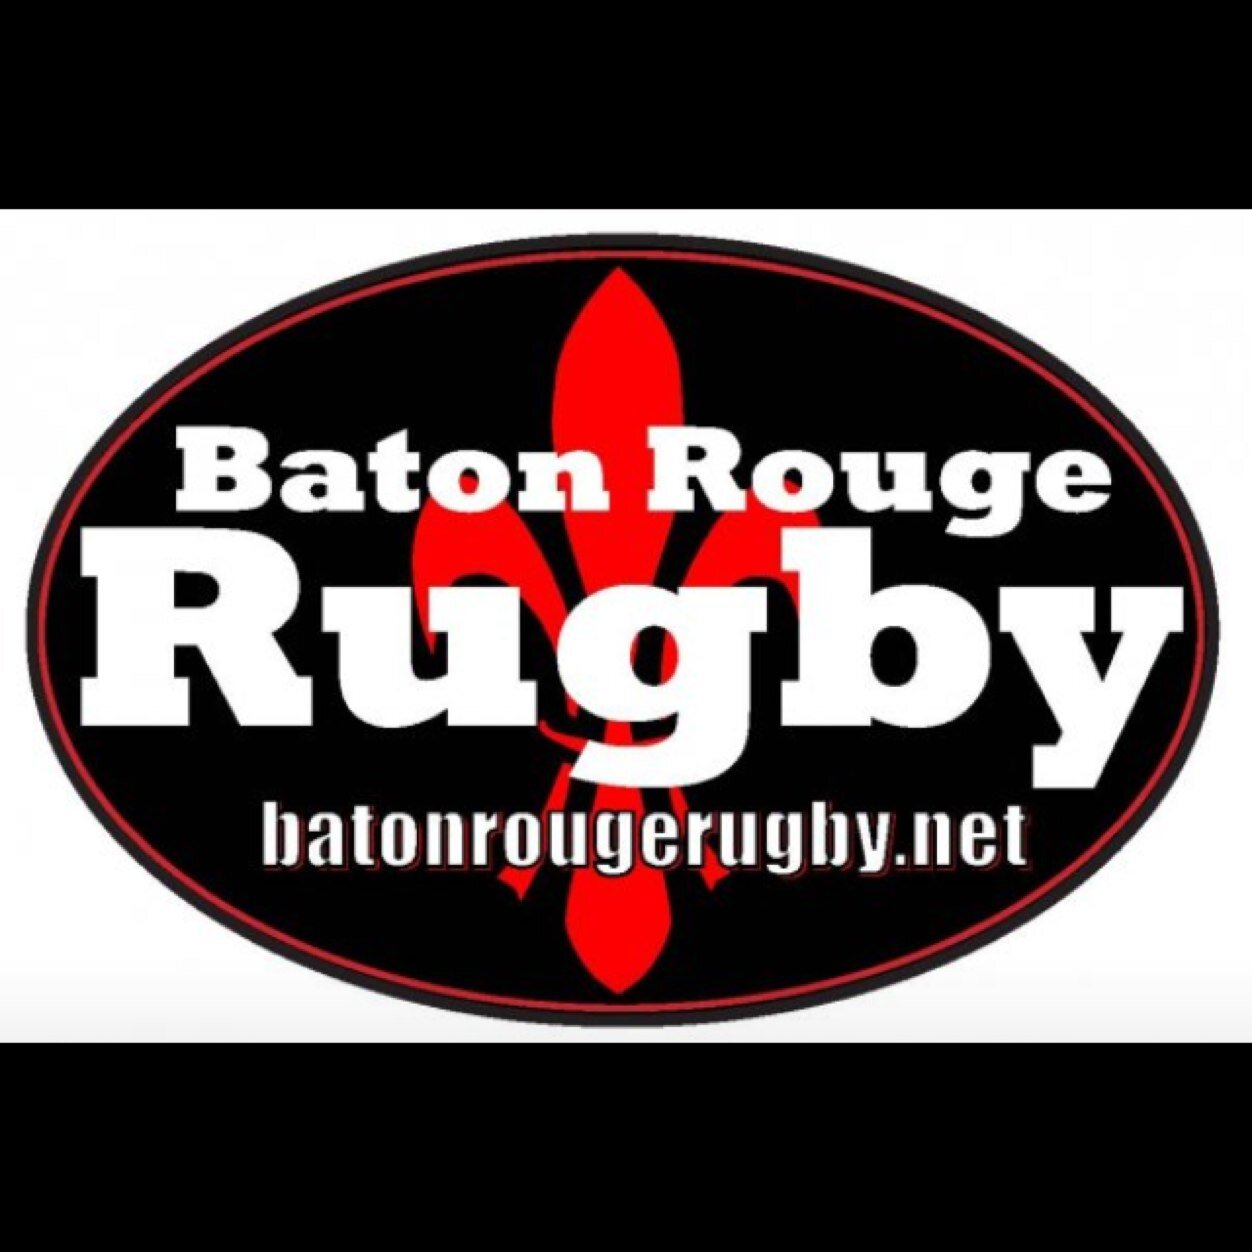 To promote, develop and provide U-19 rugby players and teams in Baton Rouge, LA. An effort to continue to promote the sport of rugby in Baton Rouge. To compete.